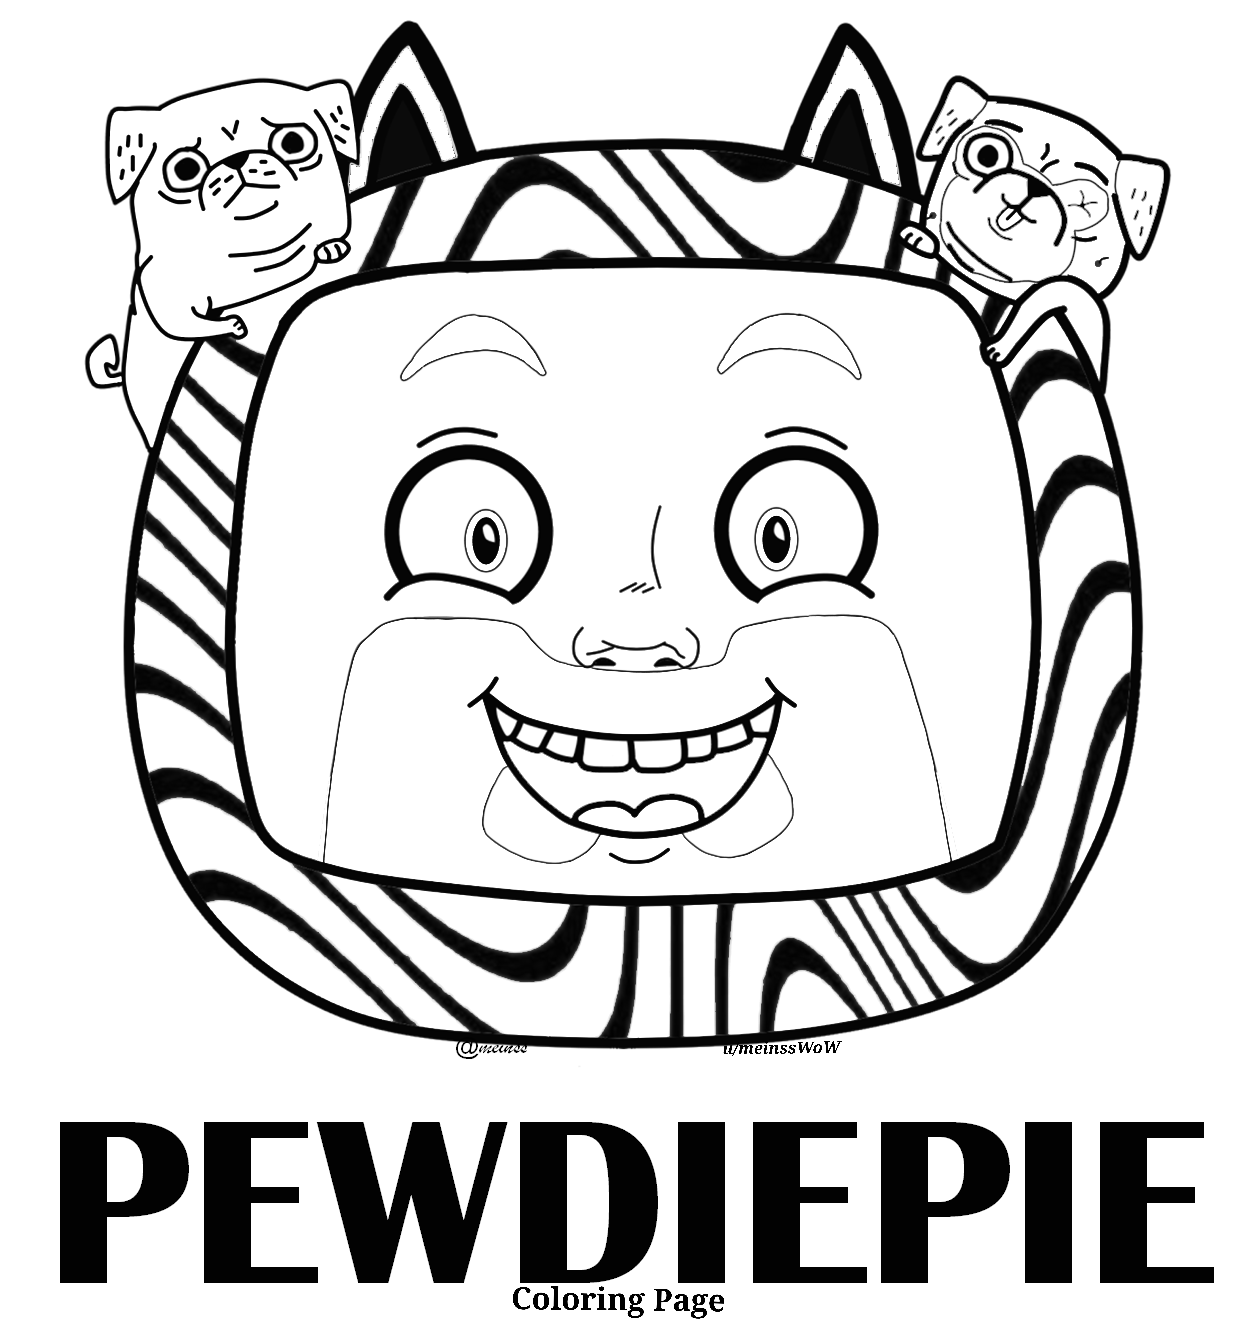 Made a coloring page for our new viewers. Original art by u/meinssWoW :  r/PewdiepieSubmissions